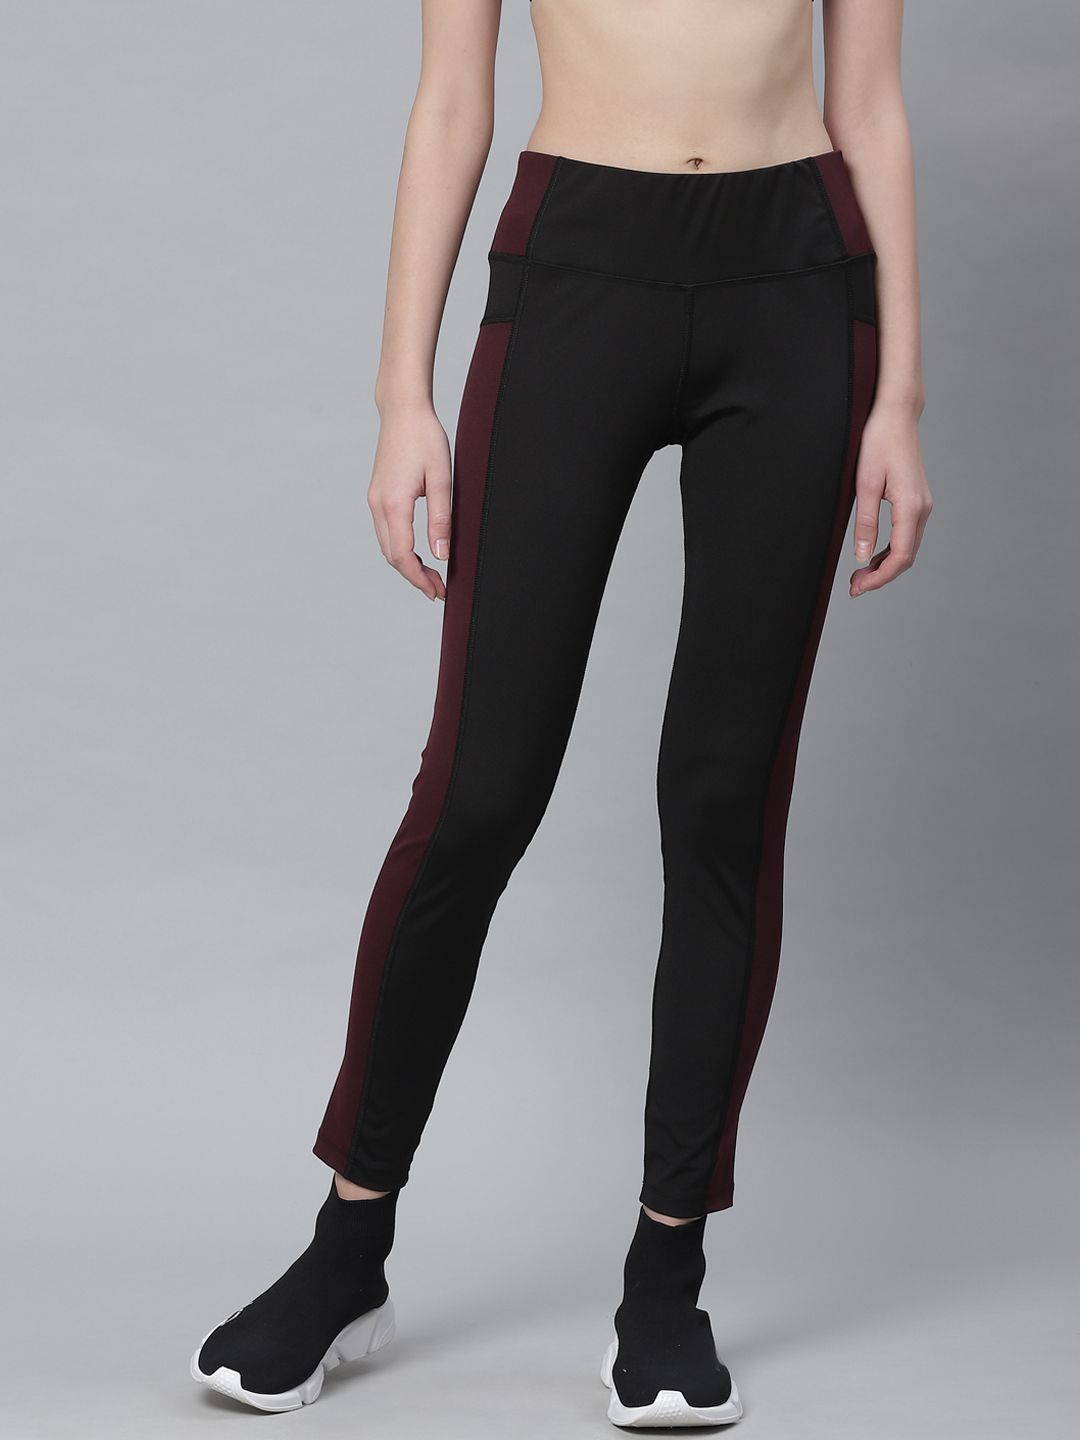 Chkokko Women Black Solid Gym Tights Price in India